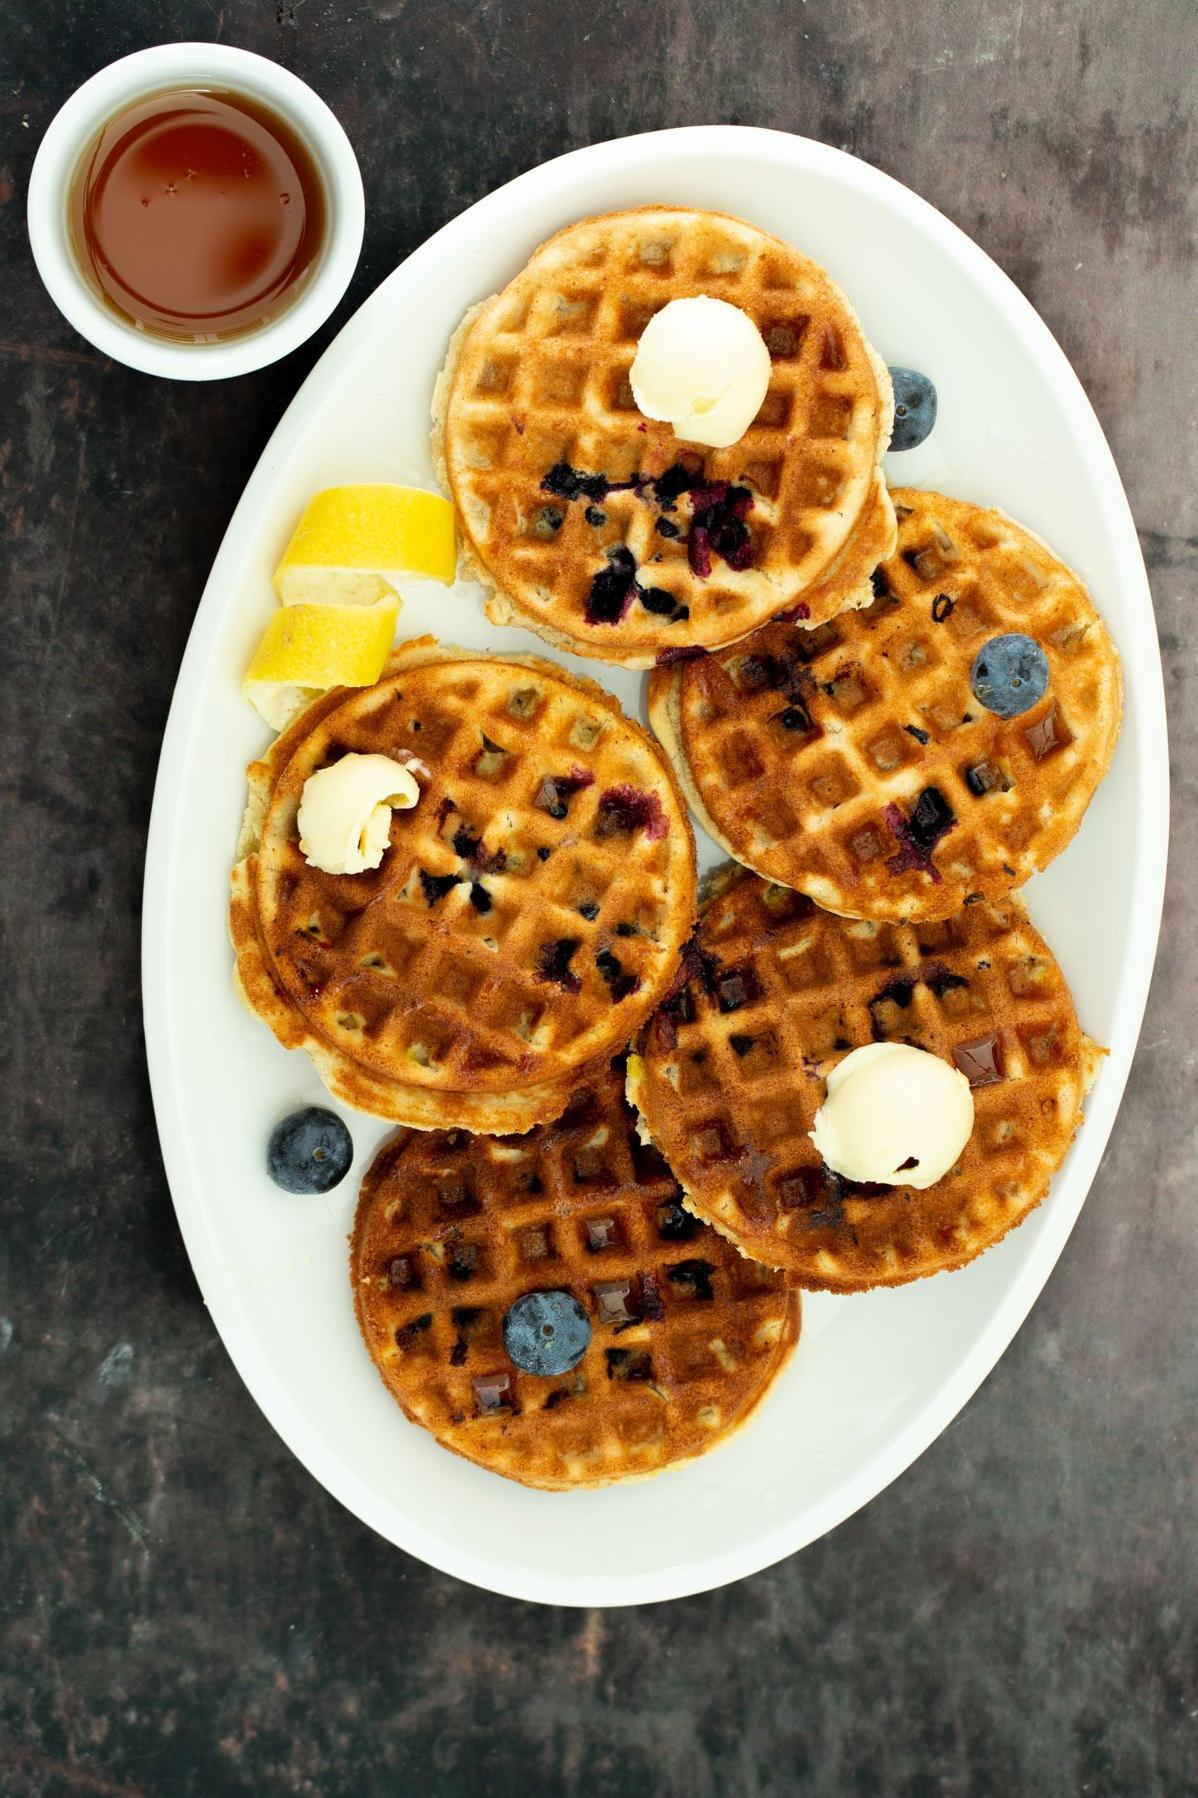  Time to up your breakfast game with these Lemon Blueberry Waffles!